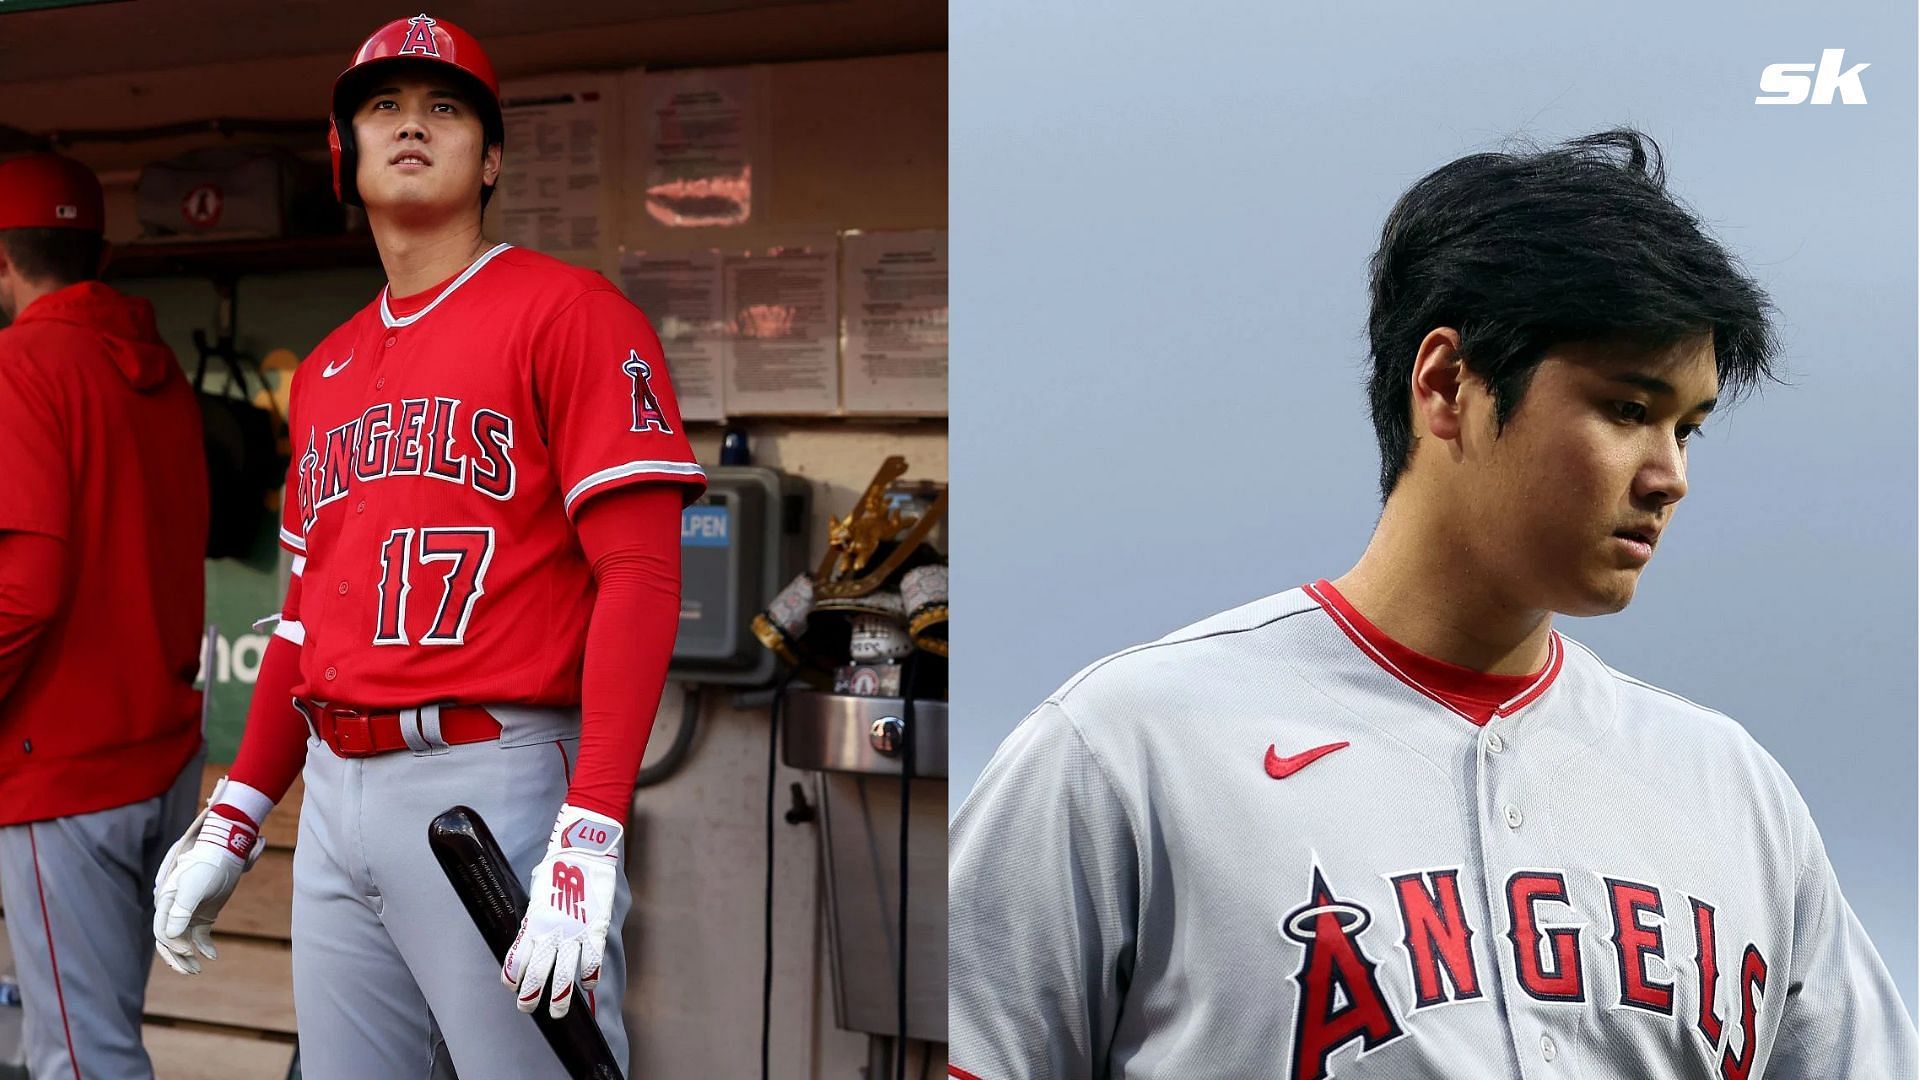 Shohei Ohtani Update: Small group of teams expected to meet two-way phenom as negotiations enter 